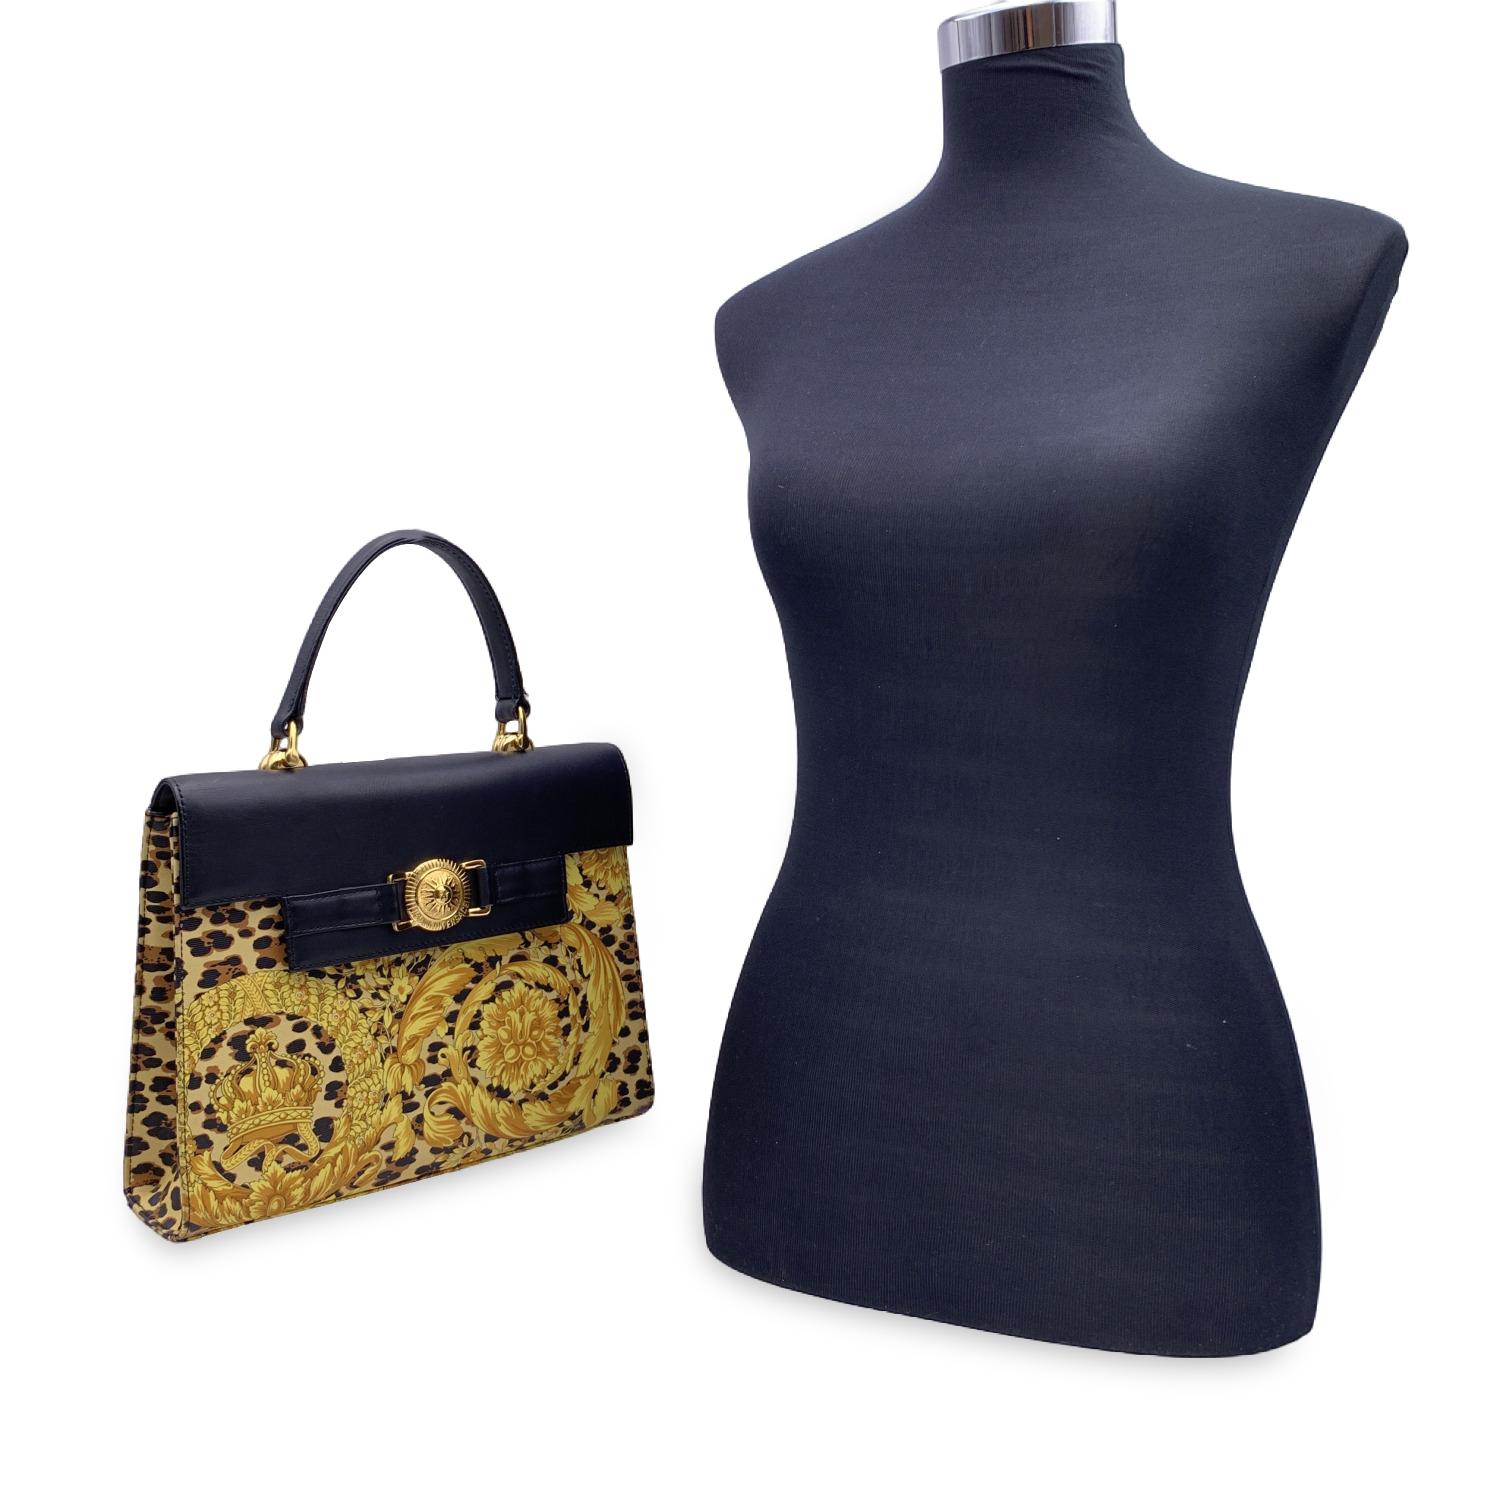 Beautiful vintage rare Gianni Versace handbag with iconic Baroque Wild Flower print. Printed canvas with black leather detail and handle. Flap with magnetic button closure. Gold metal hardware. Rear zip pocket. Gold tone canvas lining. 1 side zip